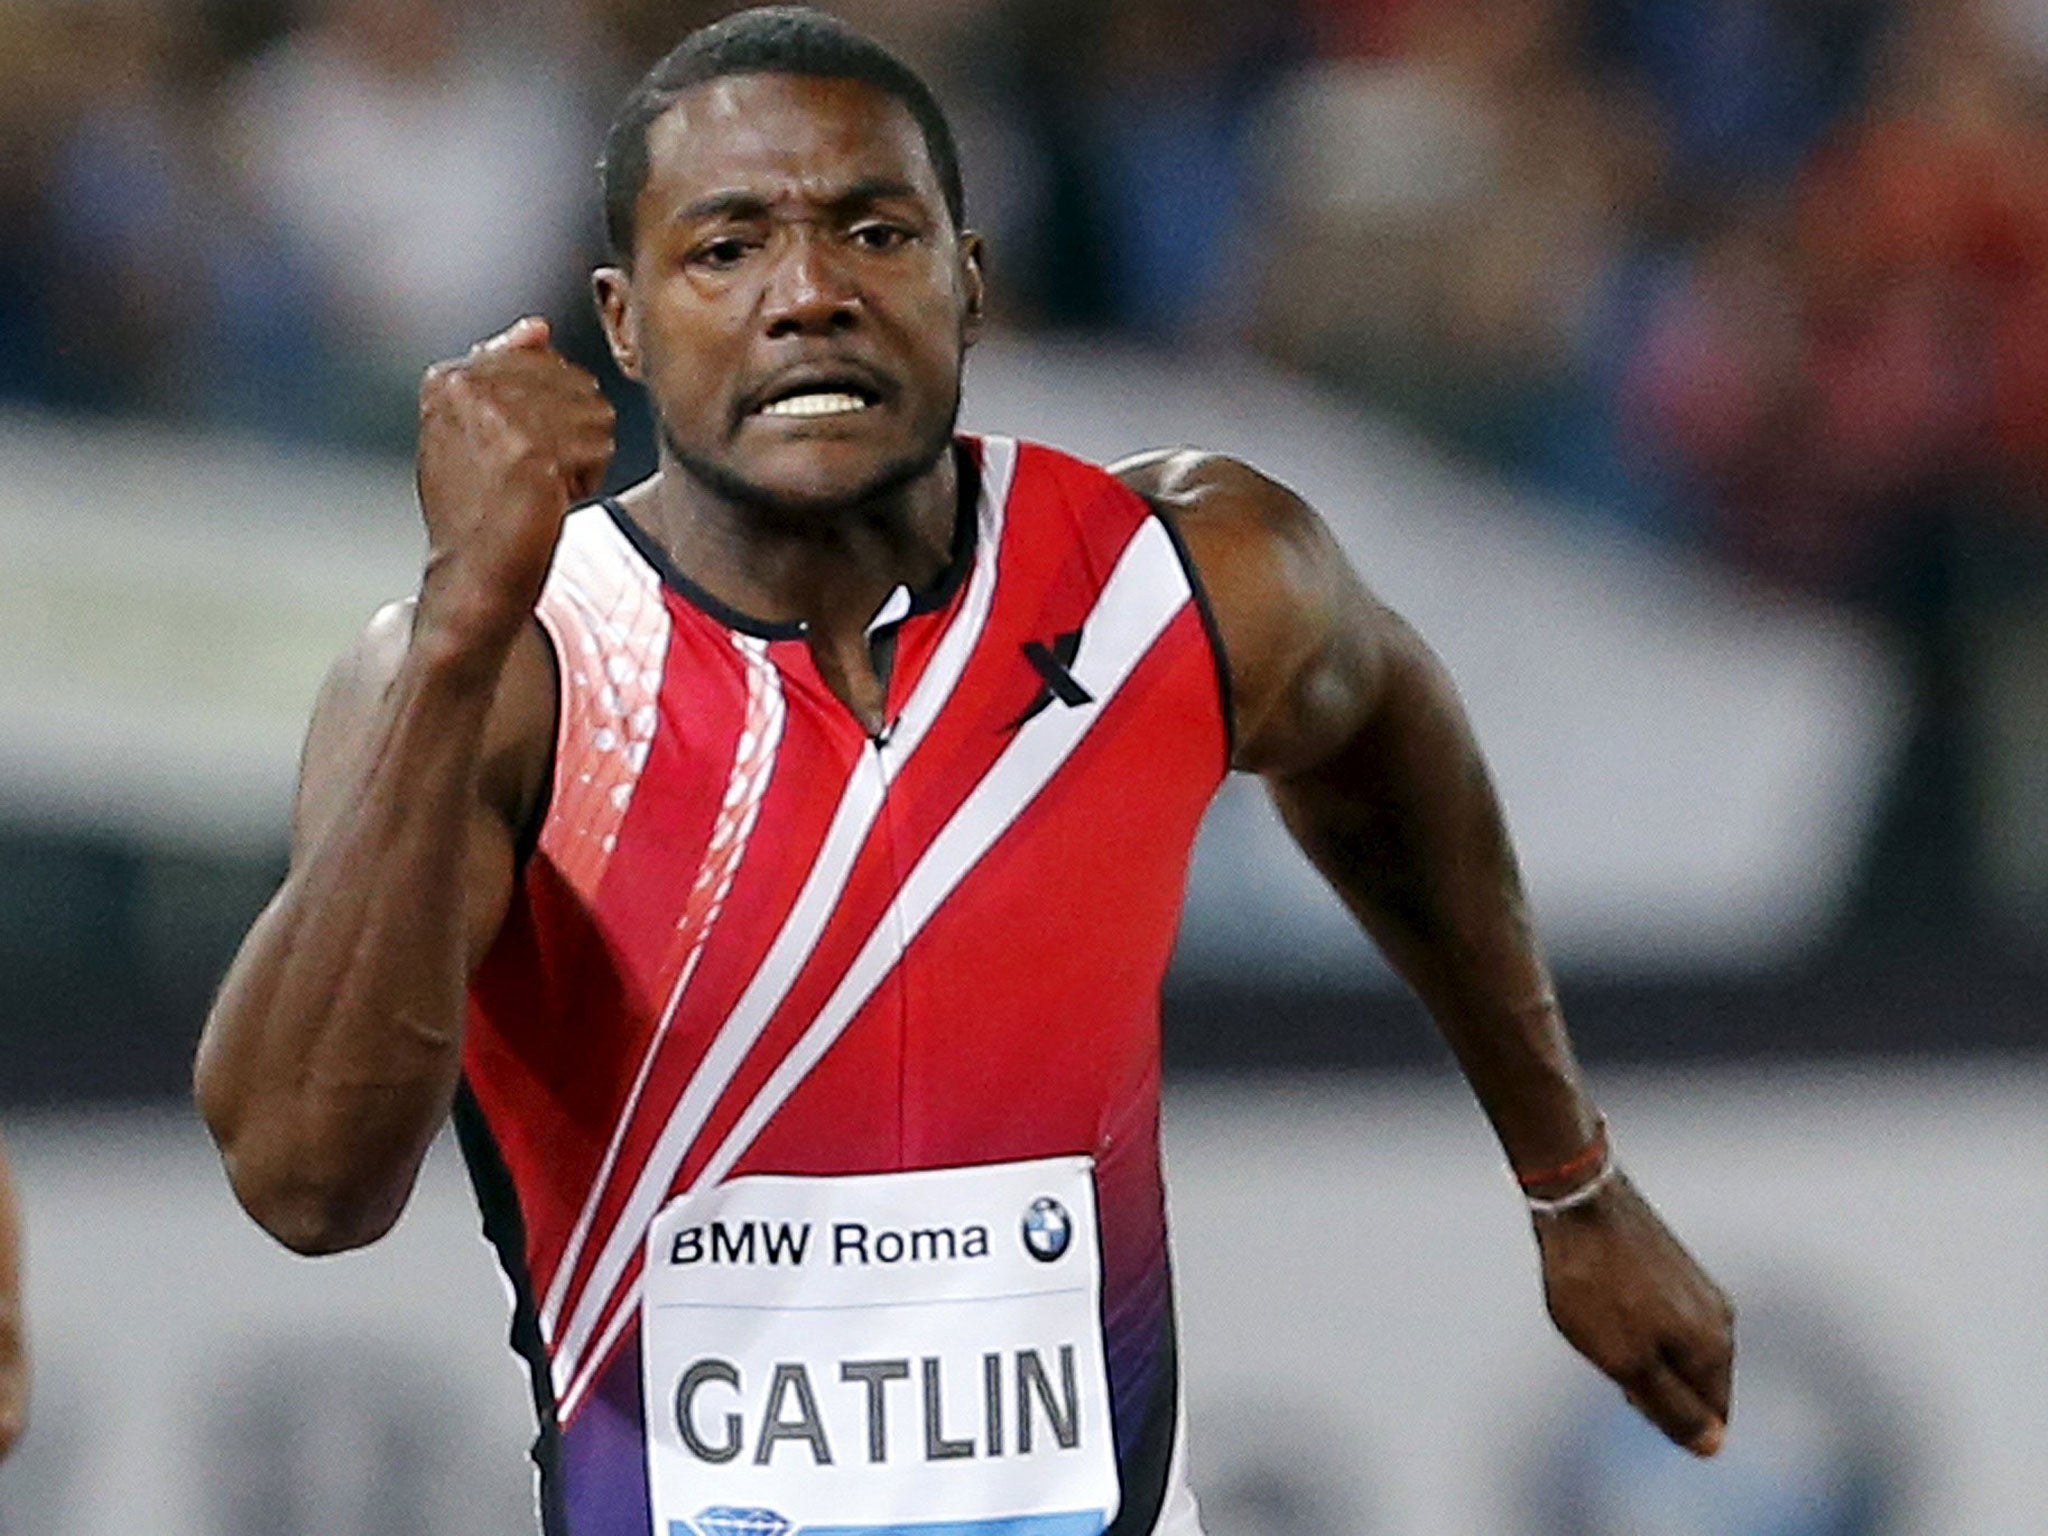 Justin Gatlin is running faster than ever at the age of 33